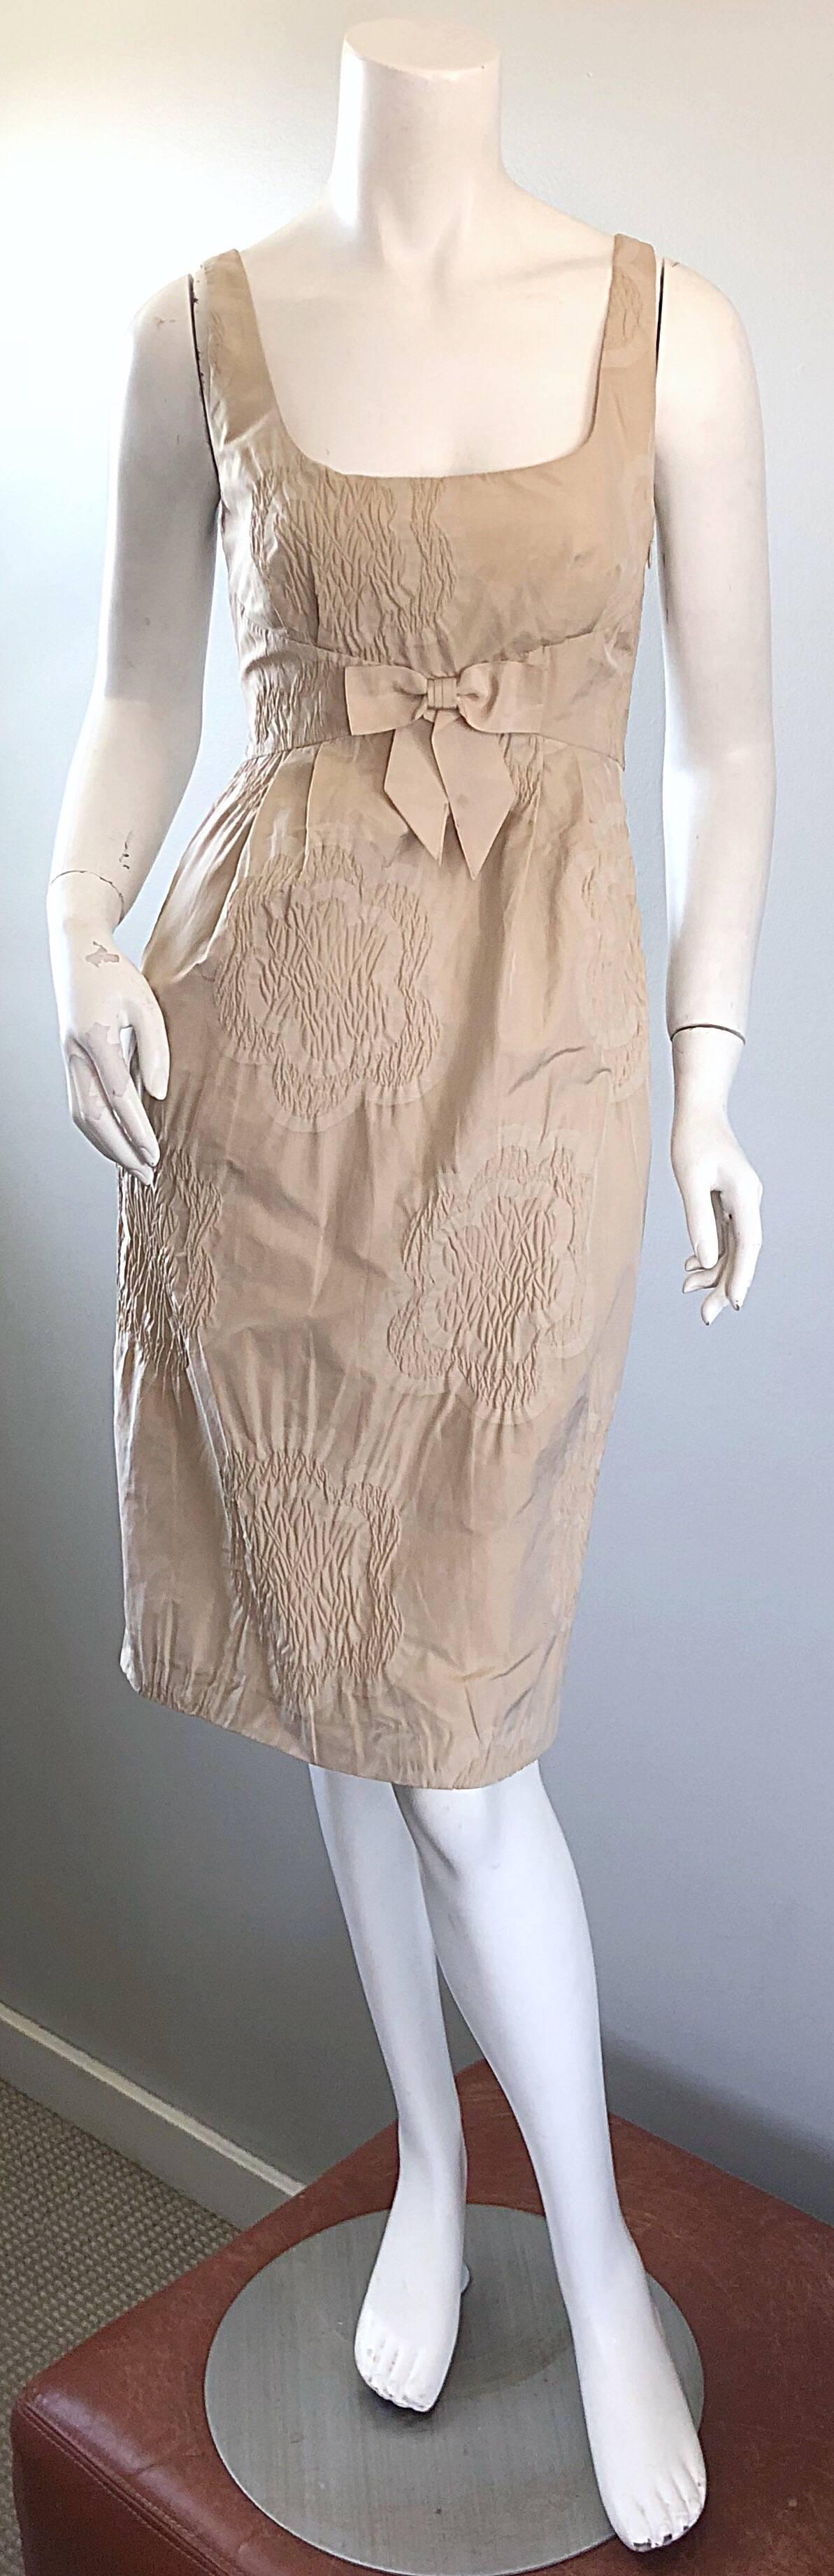 1990s Moschino Cheap & Chic Size 4 Khaki Beige Flower Print Vintage 90s Dress For Sale 3